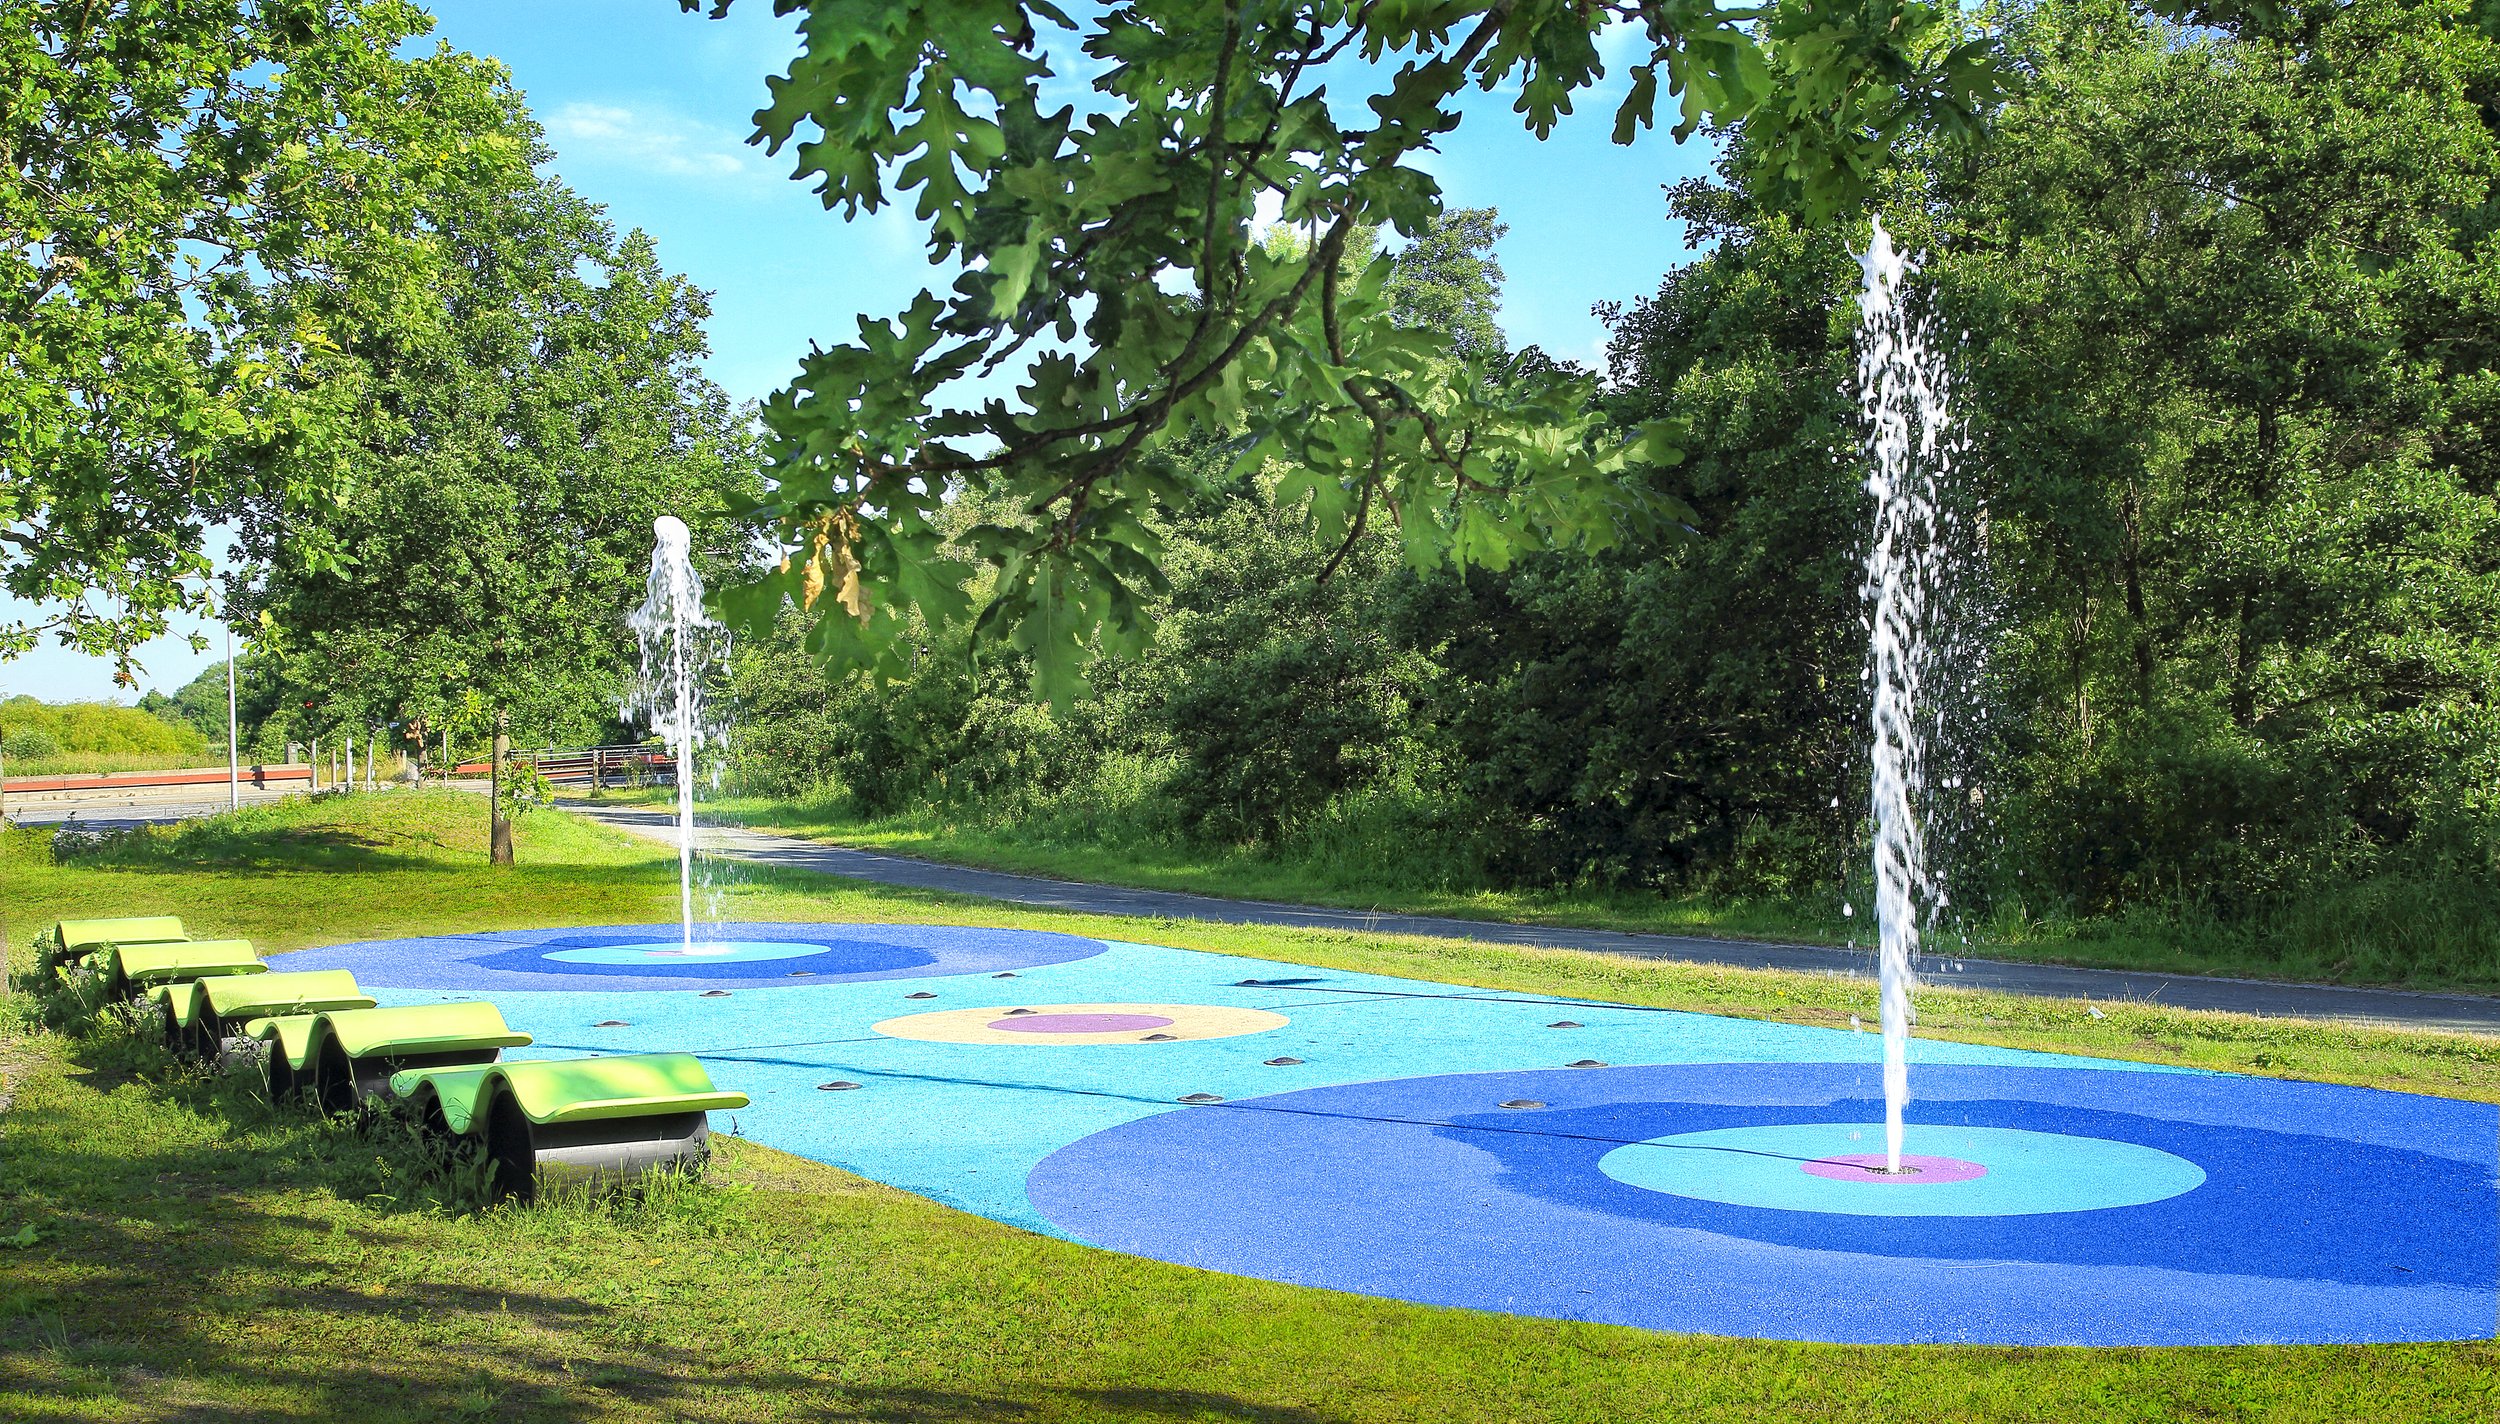 Spiloppen water play installed in collaboration with Kolding Municipality